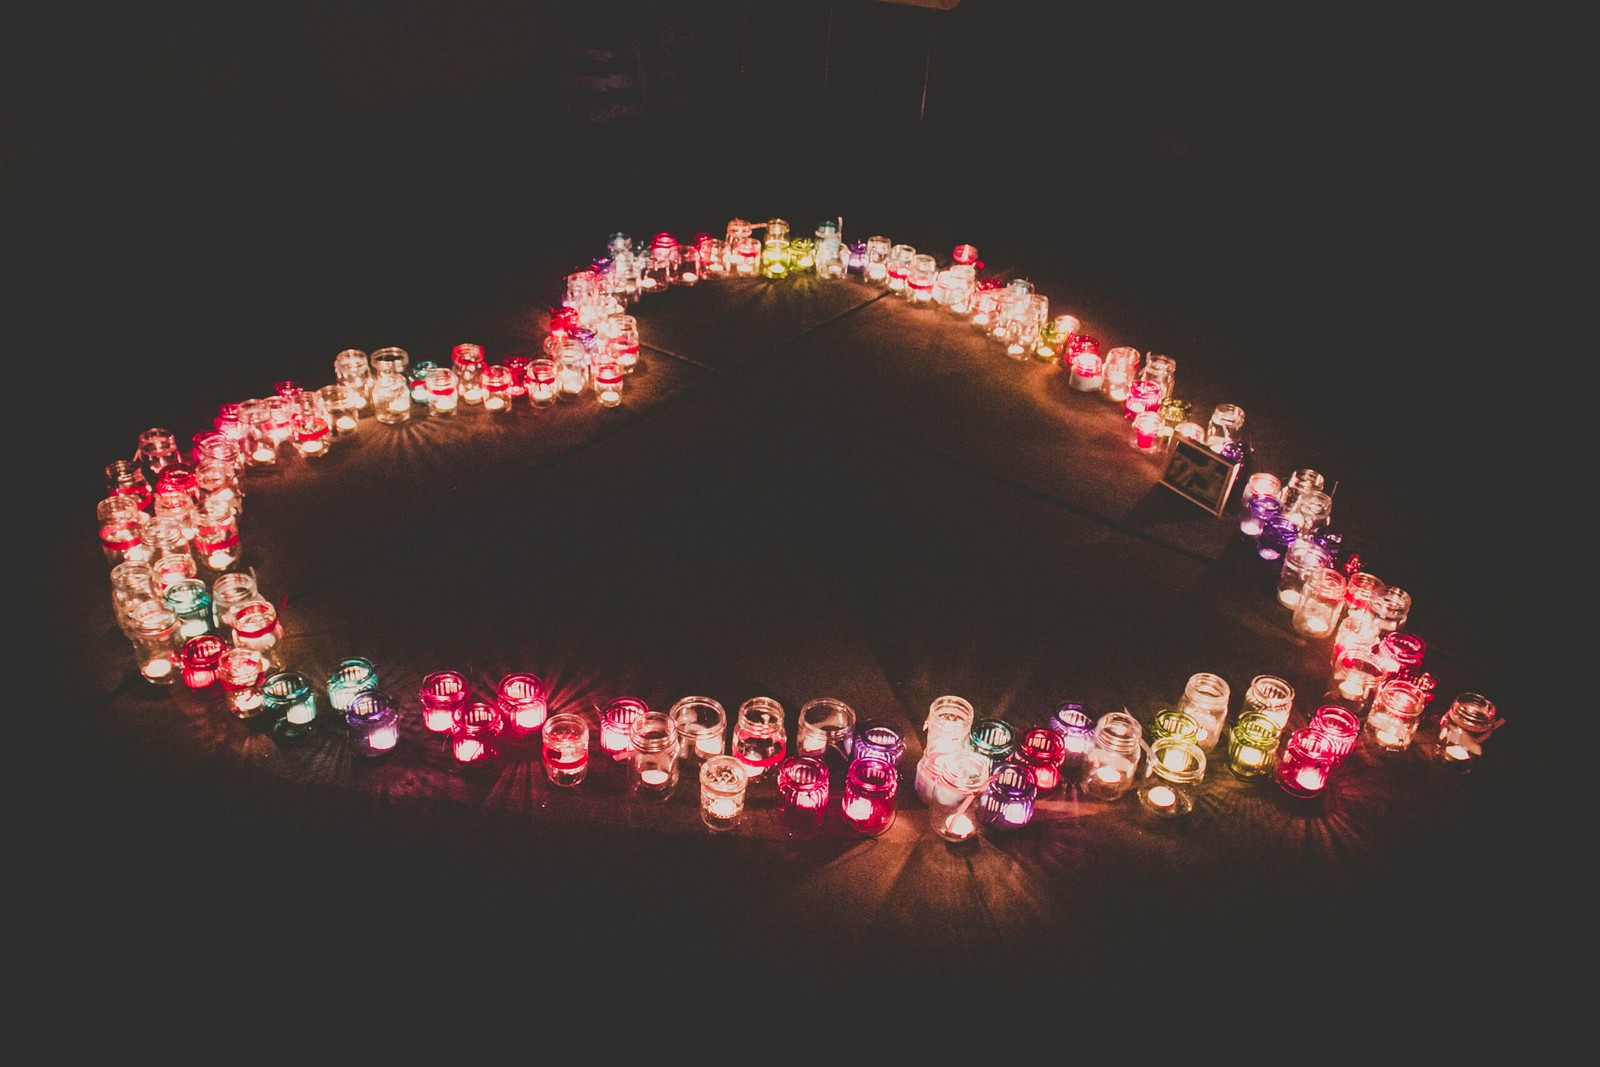 Lost & Found Grief Center and On Angels’ Wings host infant loss memorial event